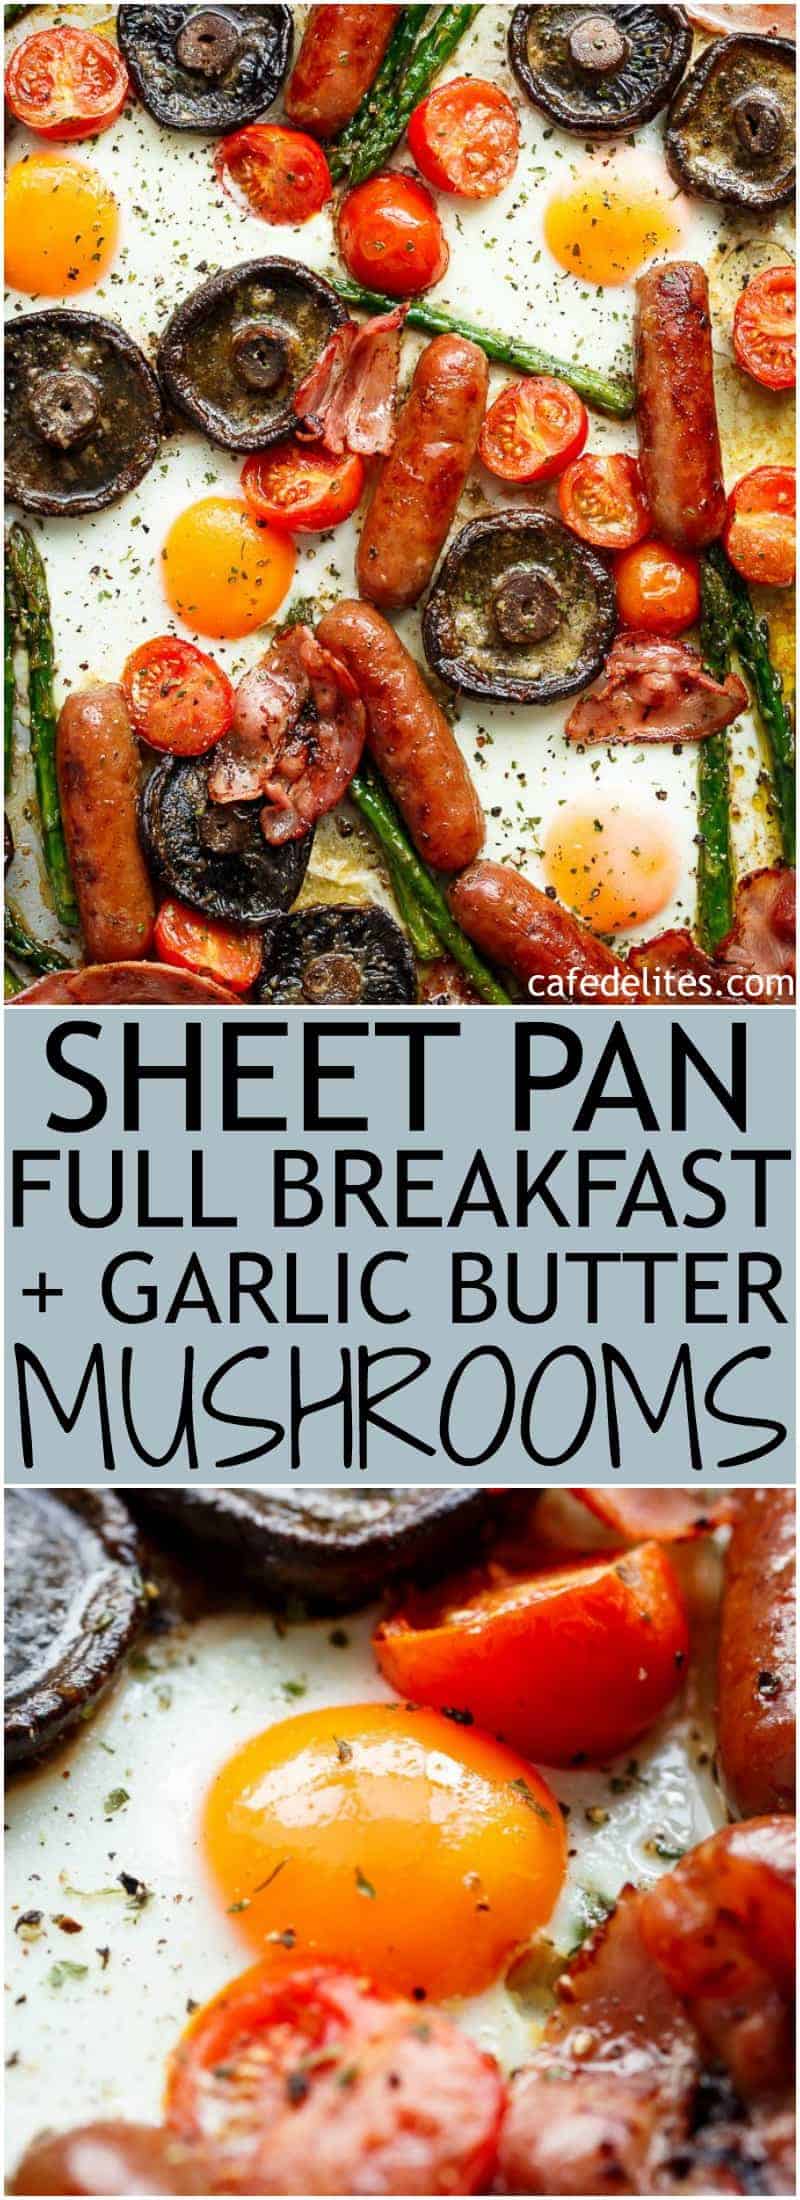 Sheet Pan Full Breakfast complete with eggs, bacon, sausages, tomatoes, asparagus, and GARLIC BUTTER MUSHROOMS! And only one pan to wash up! | https://cafedelites.com